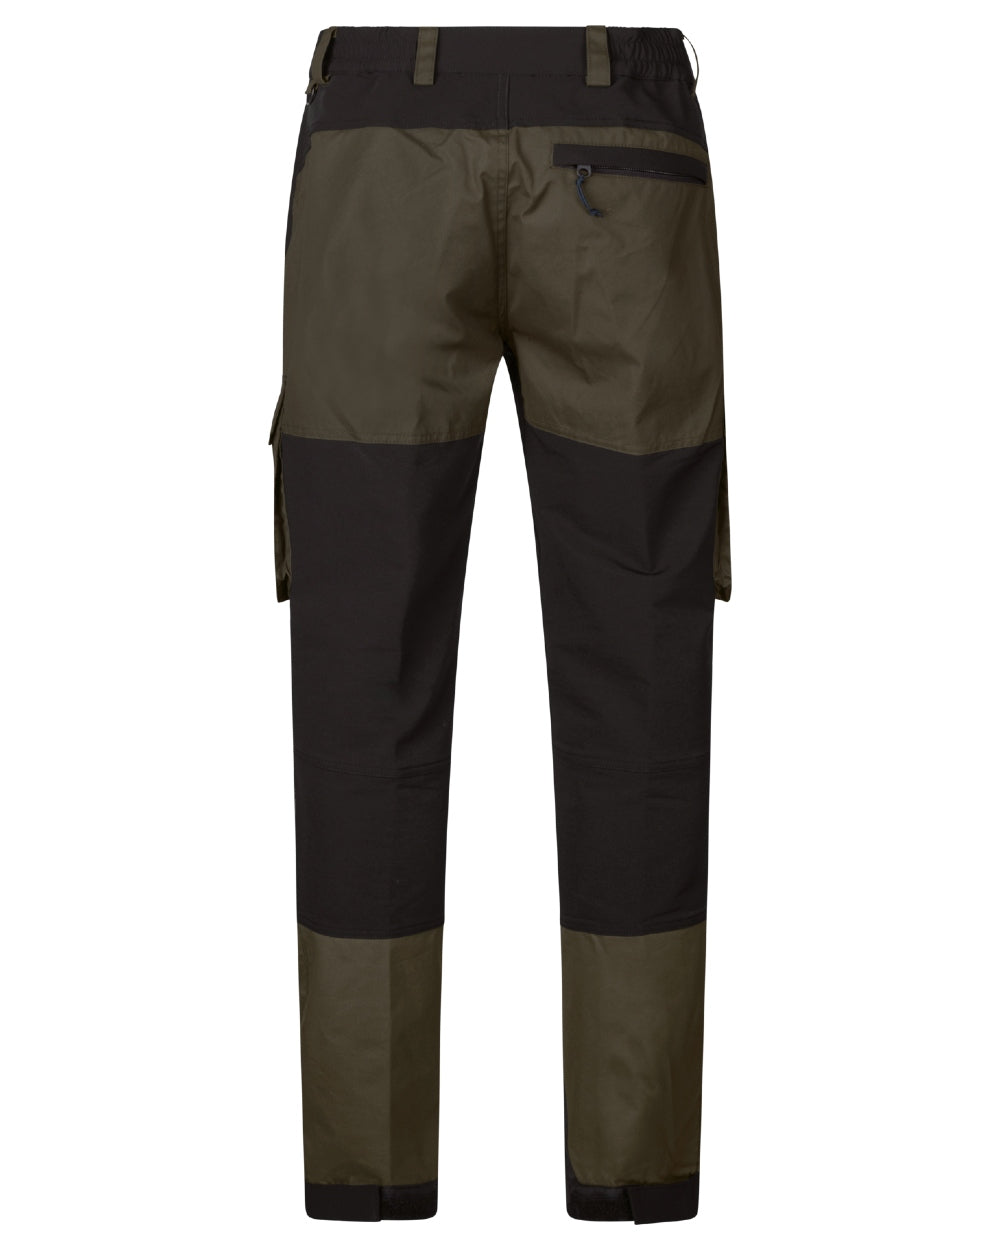 Grizzly Brown/Meteorite coloured Seeland Elm Trousers on white background 